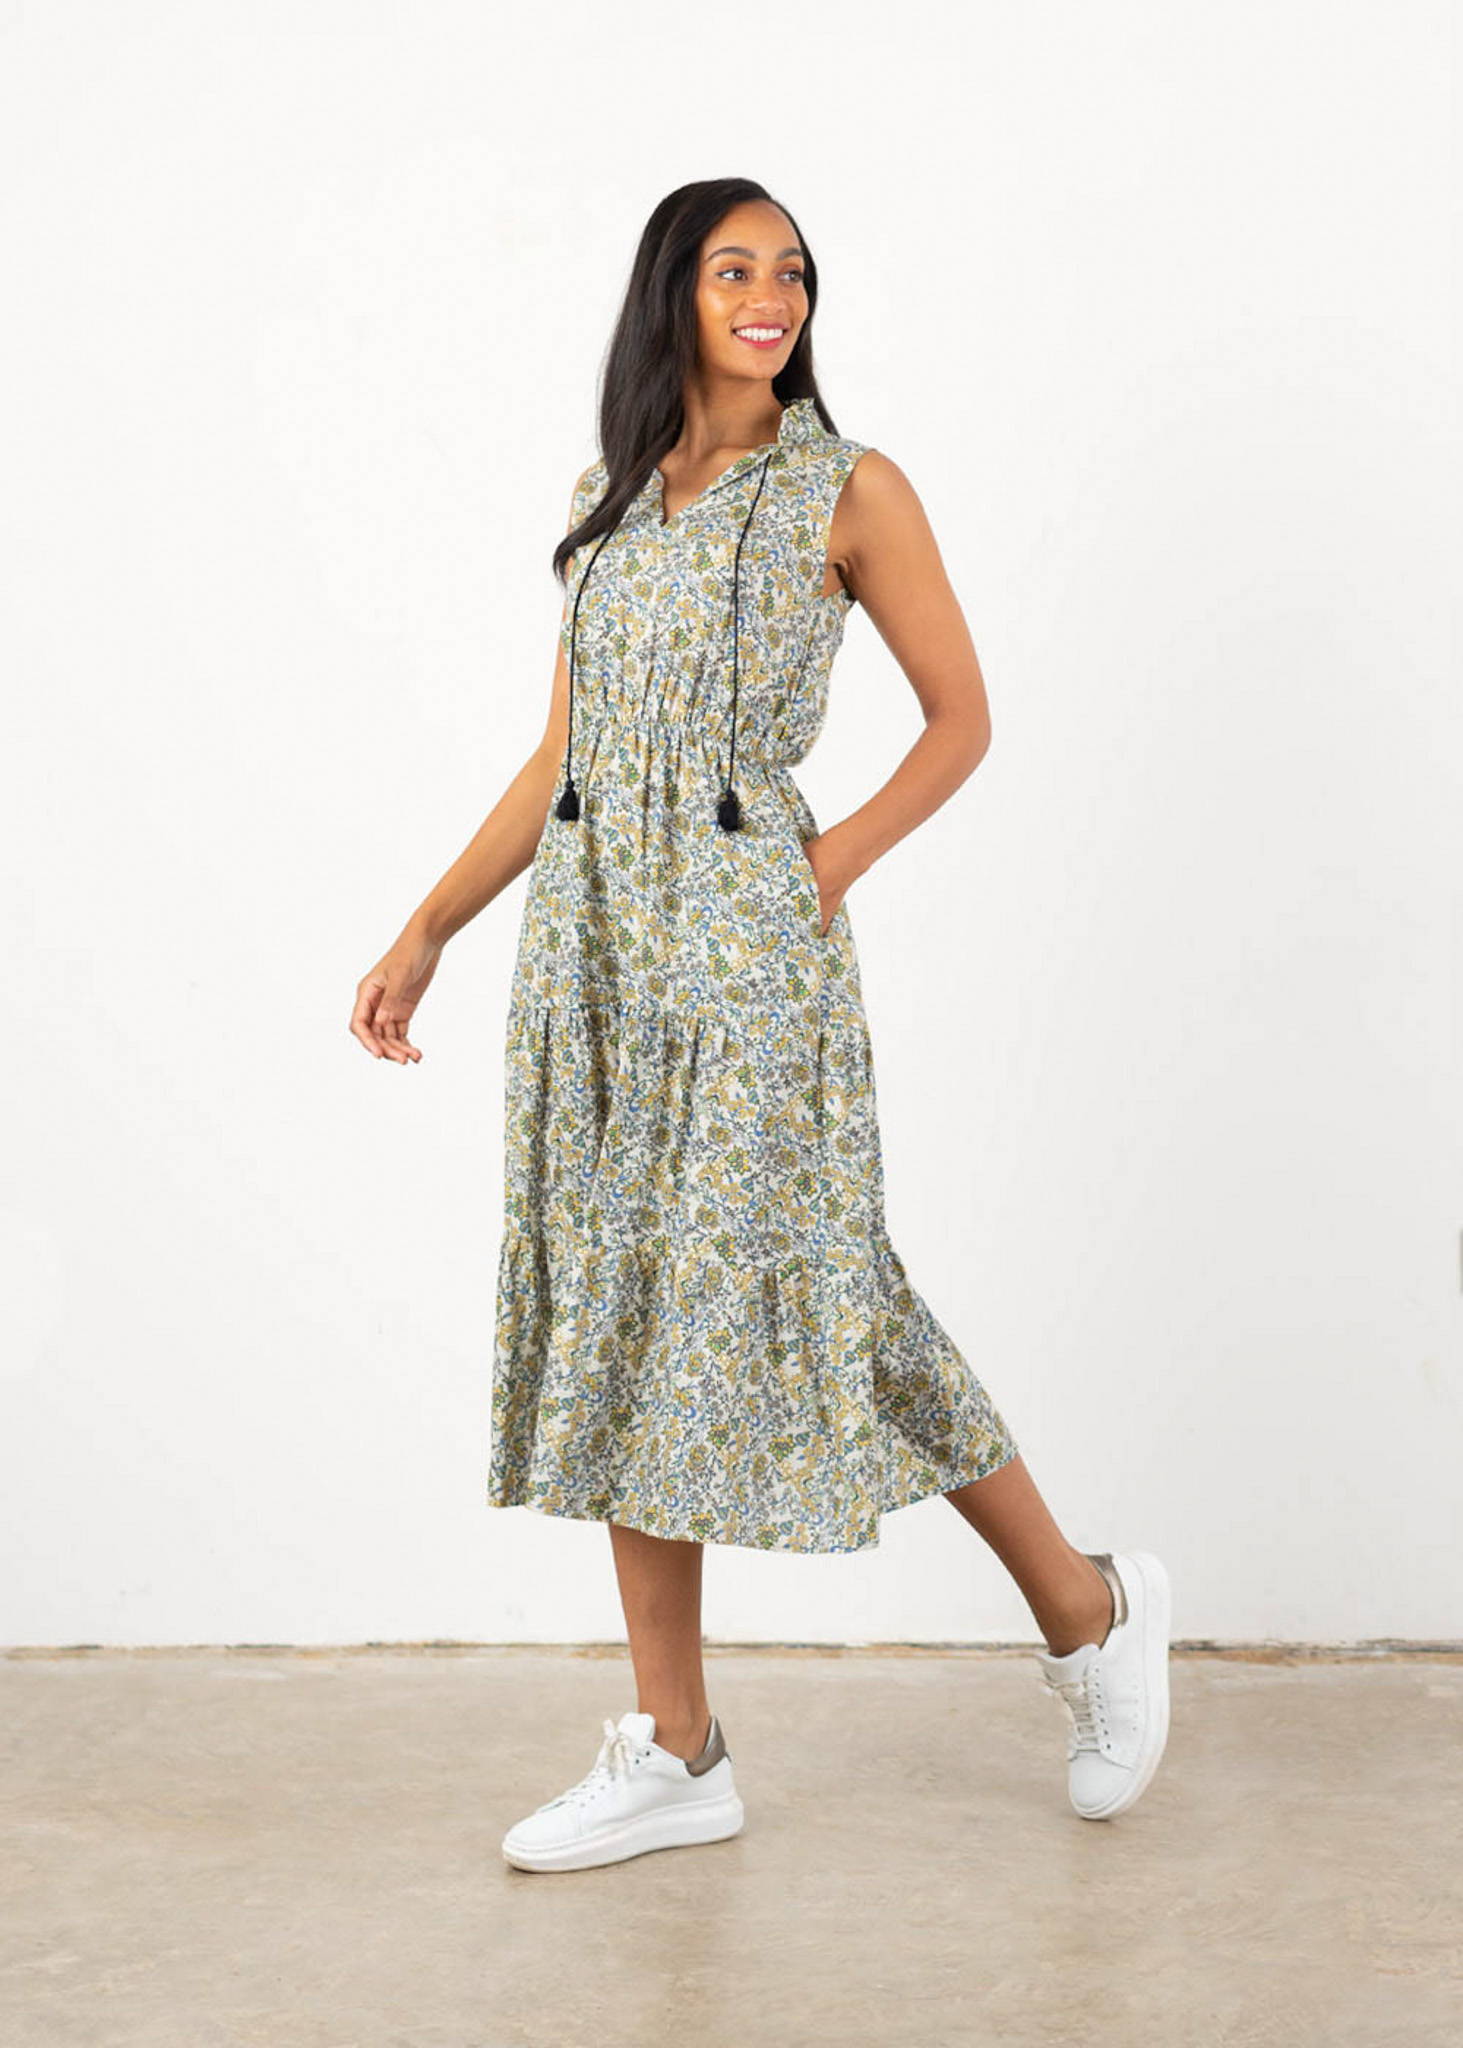 A model wearing a sleeveless midi dress with a floral patter and tassles with white trainers